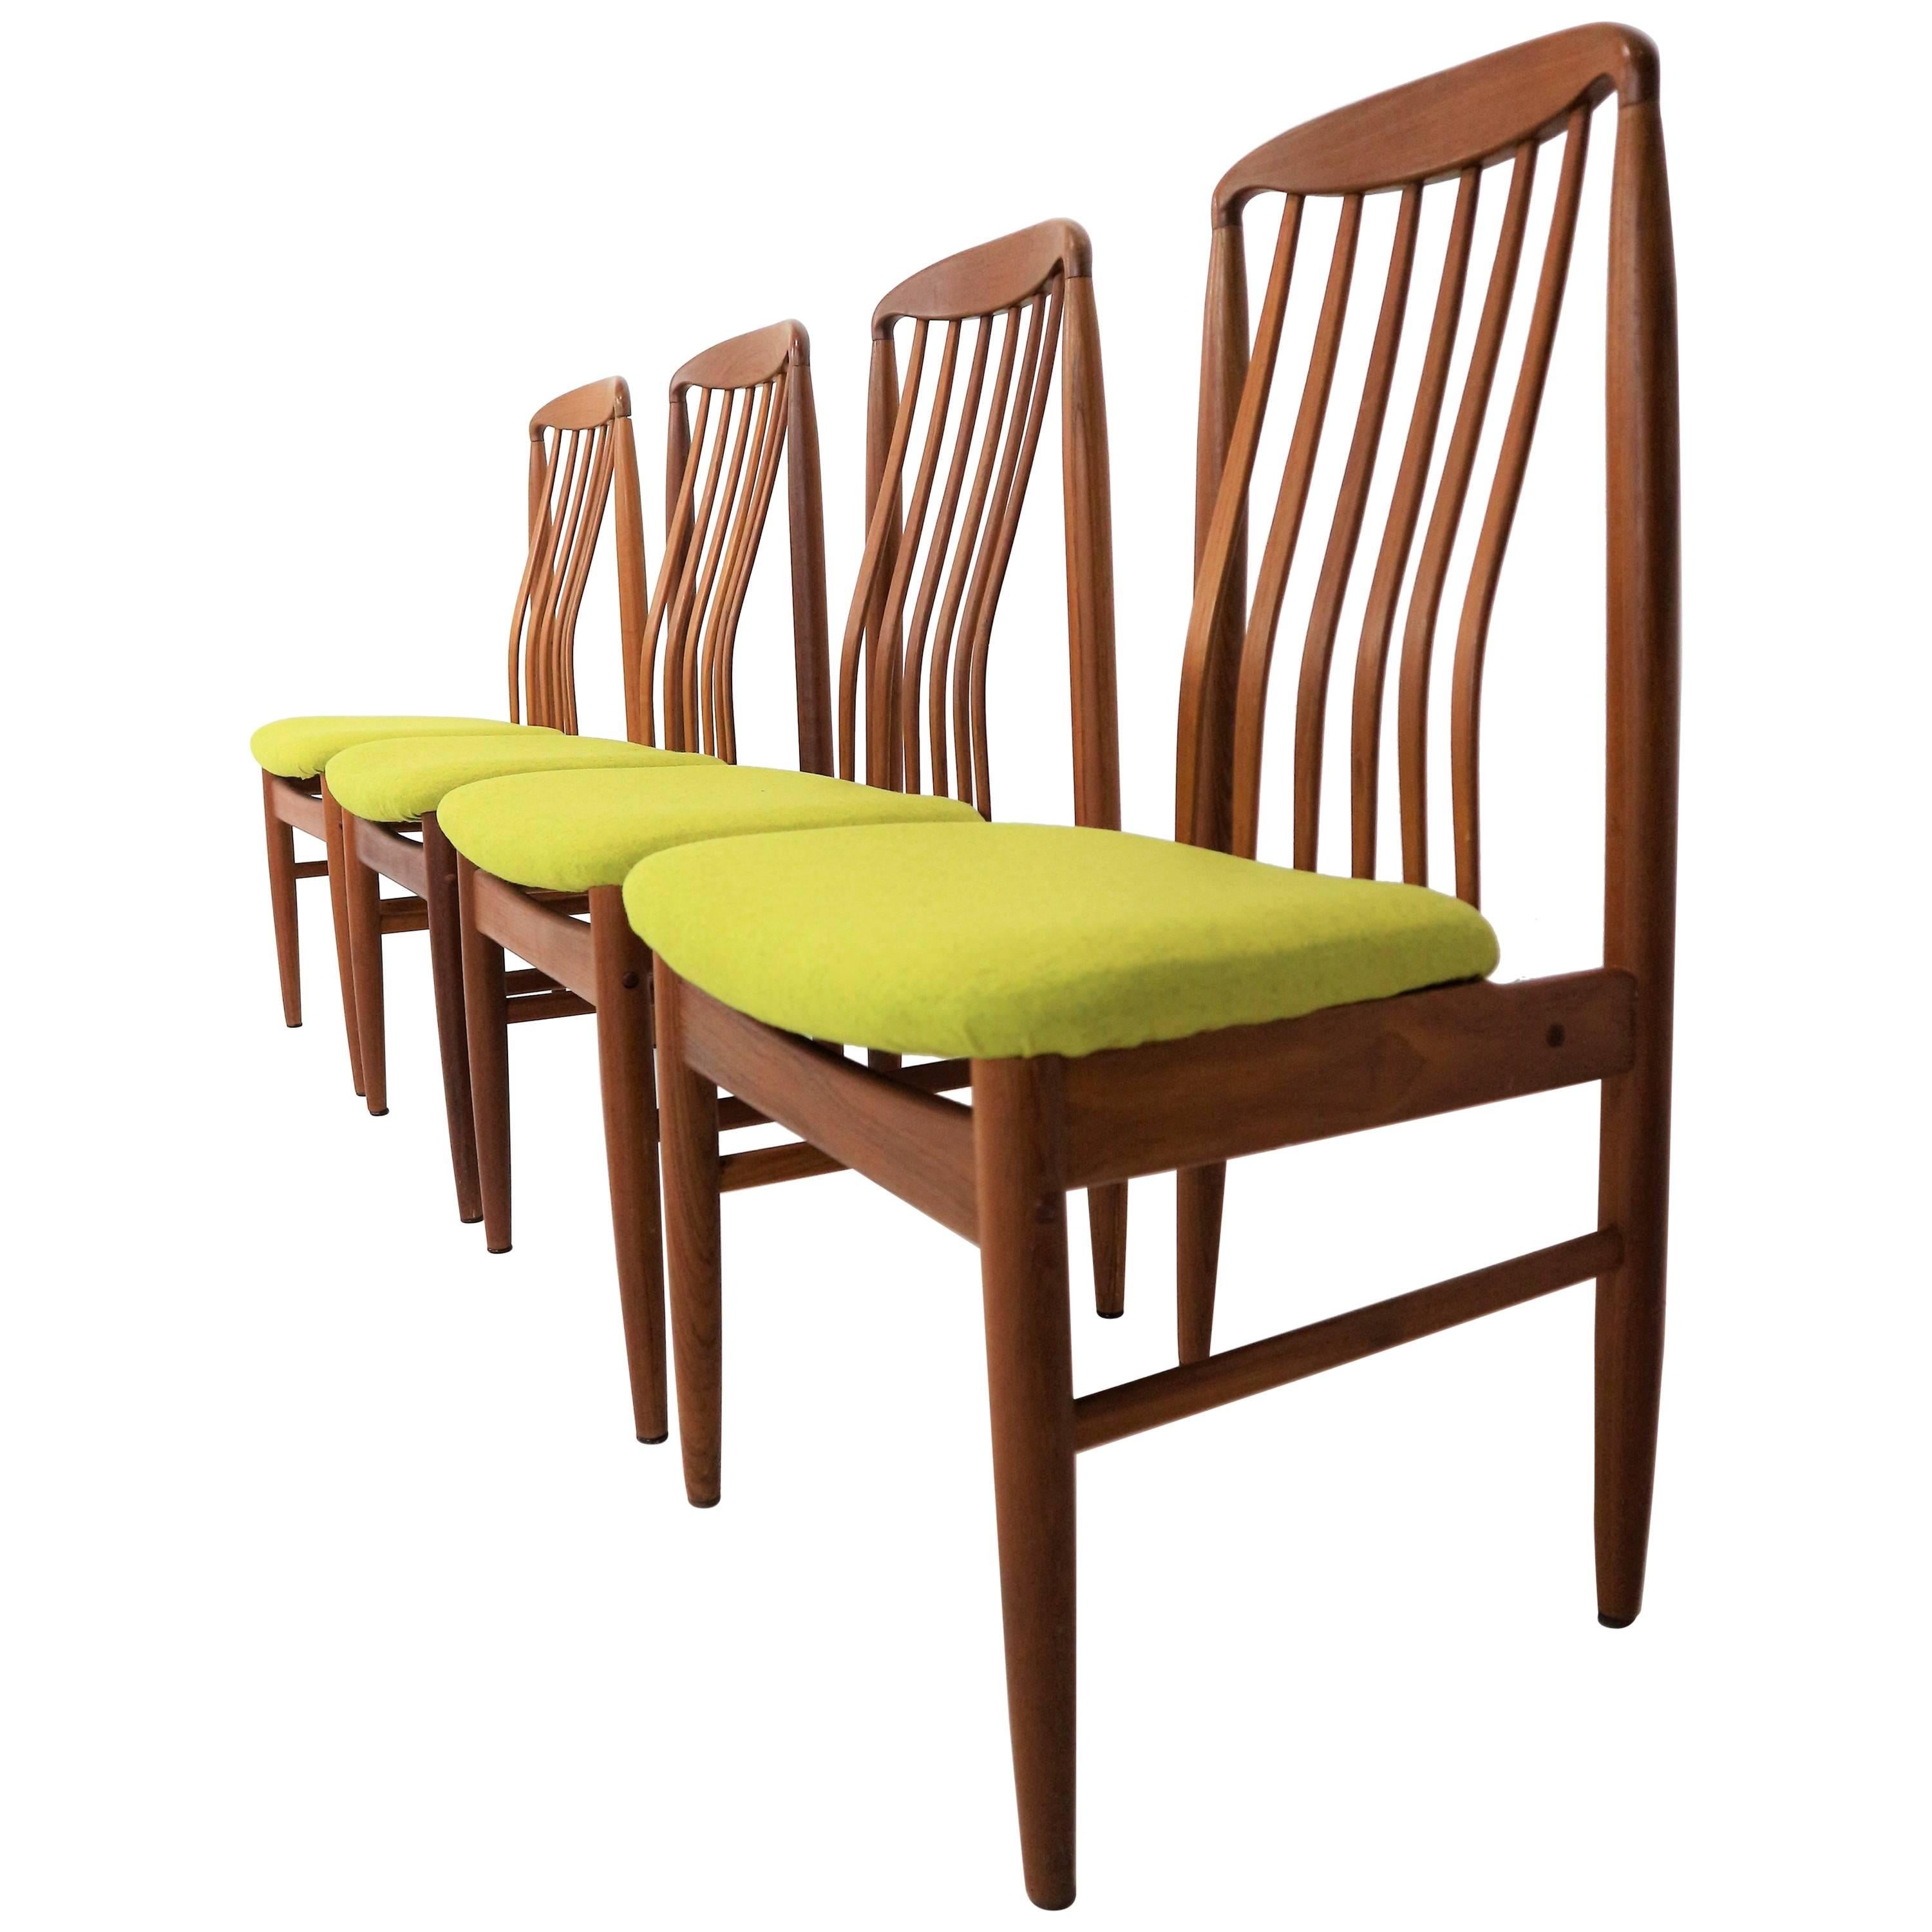 Four Danish Modern Teak Dining Chairs by Benny Linden